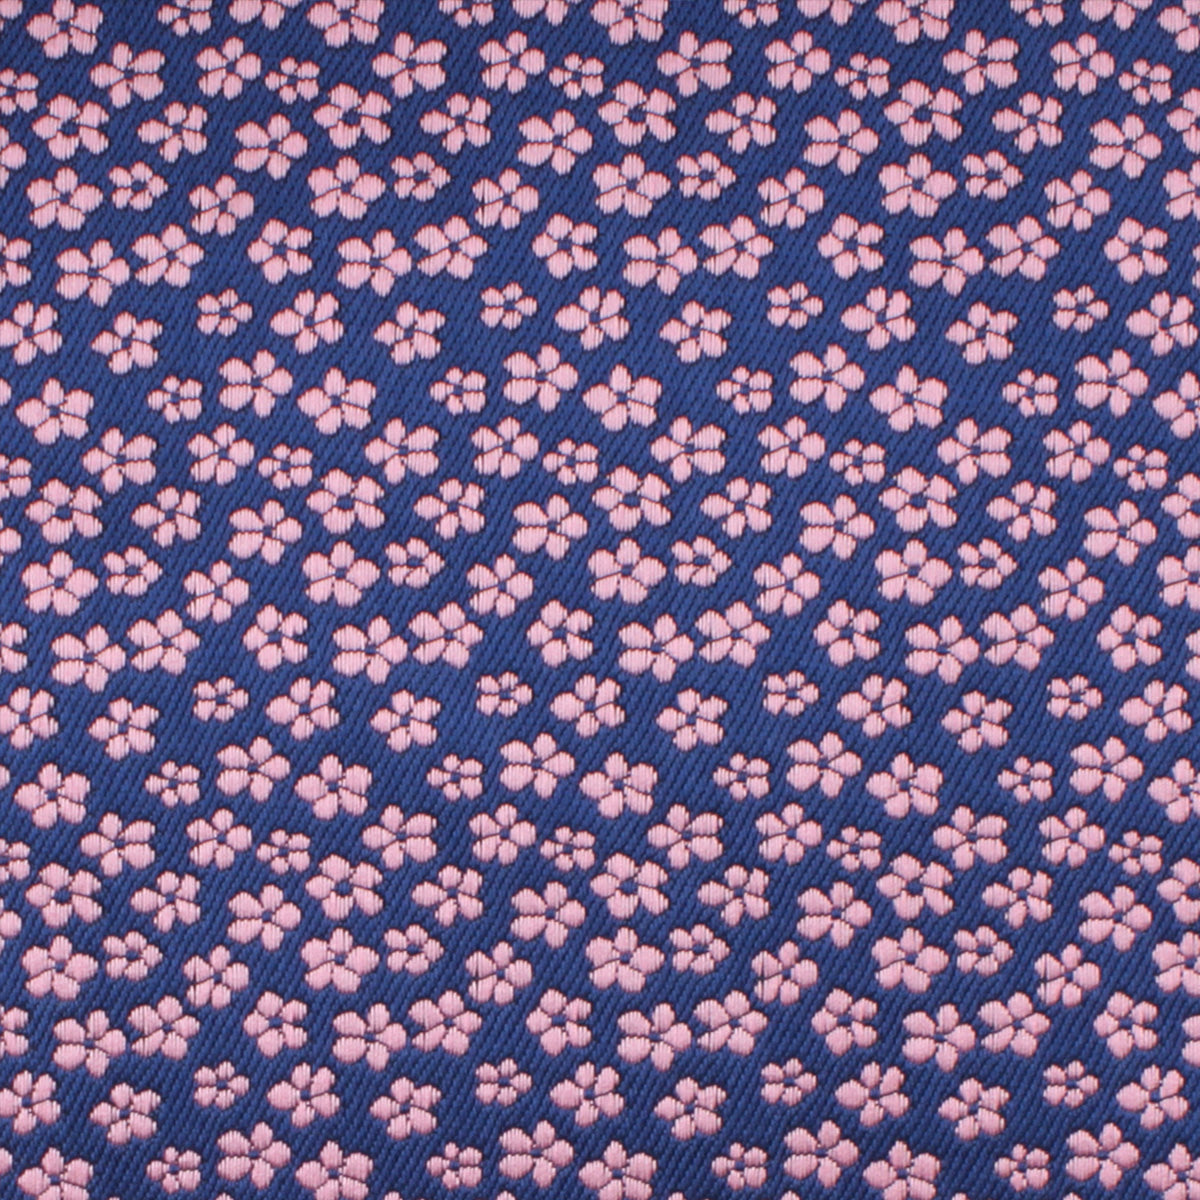 Pink Plum Blossom Floral Fabric Swatch